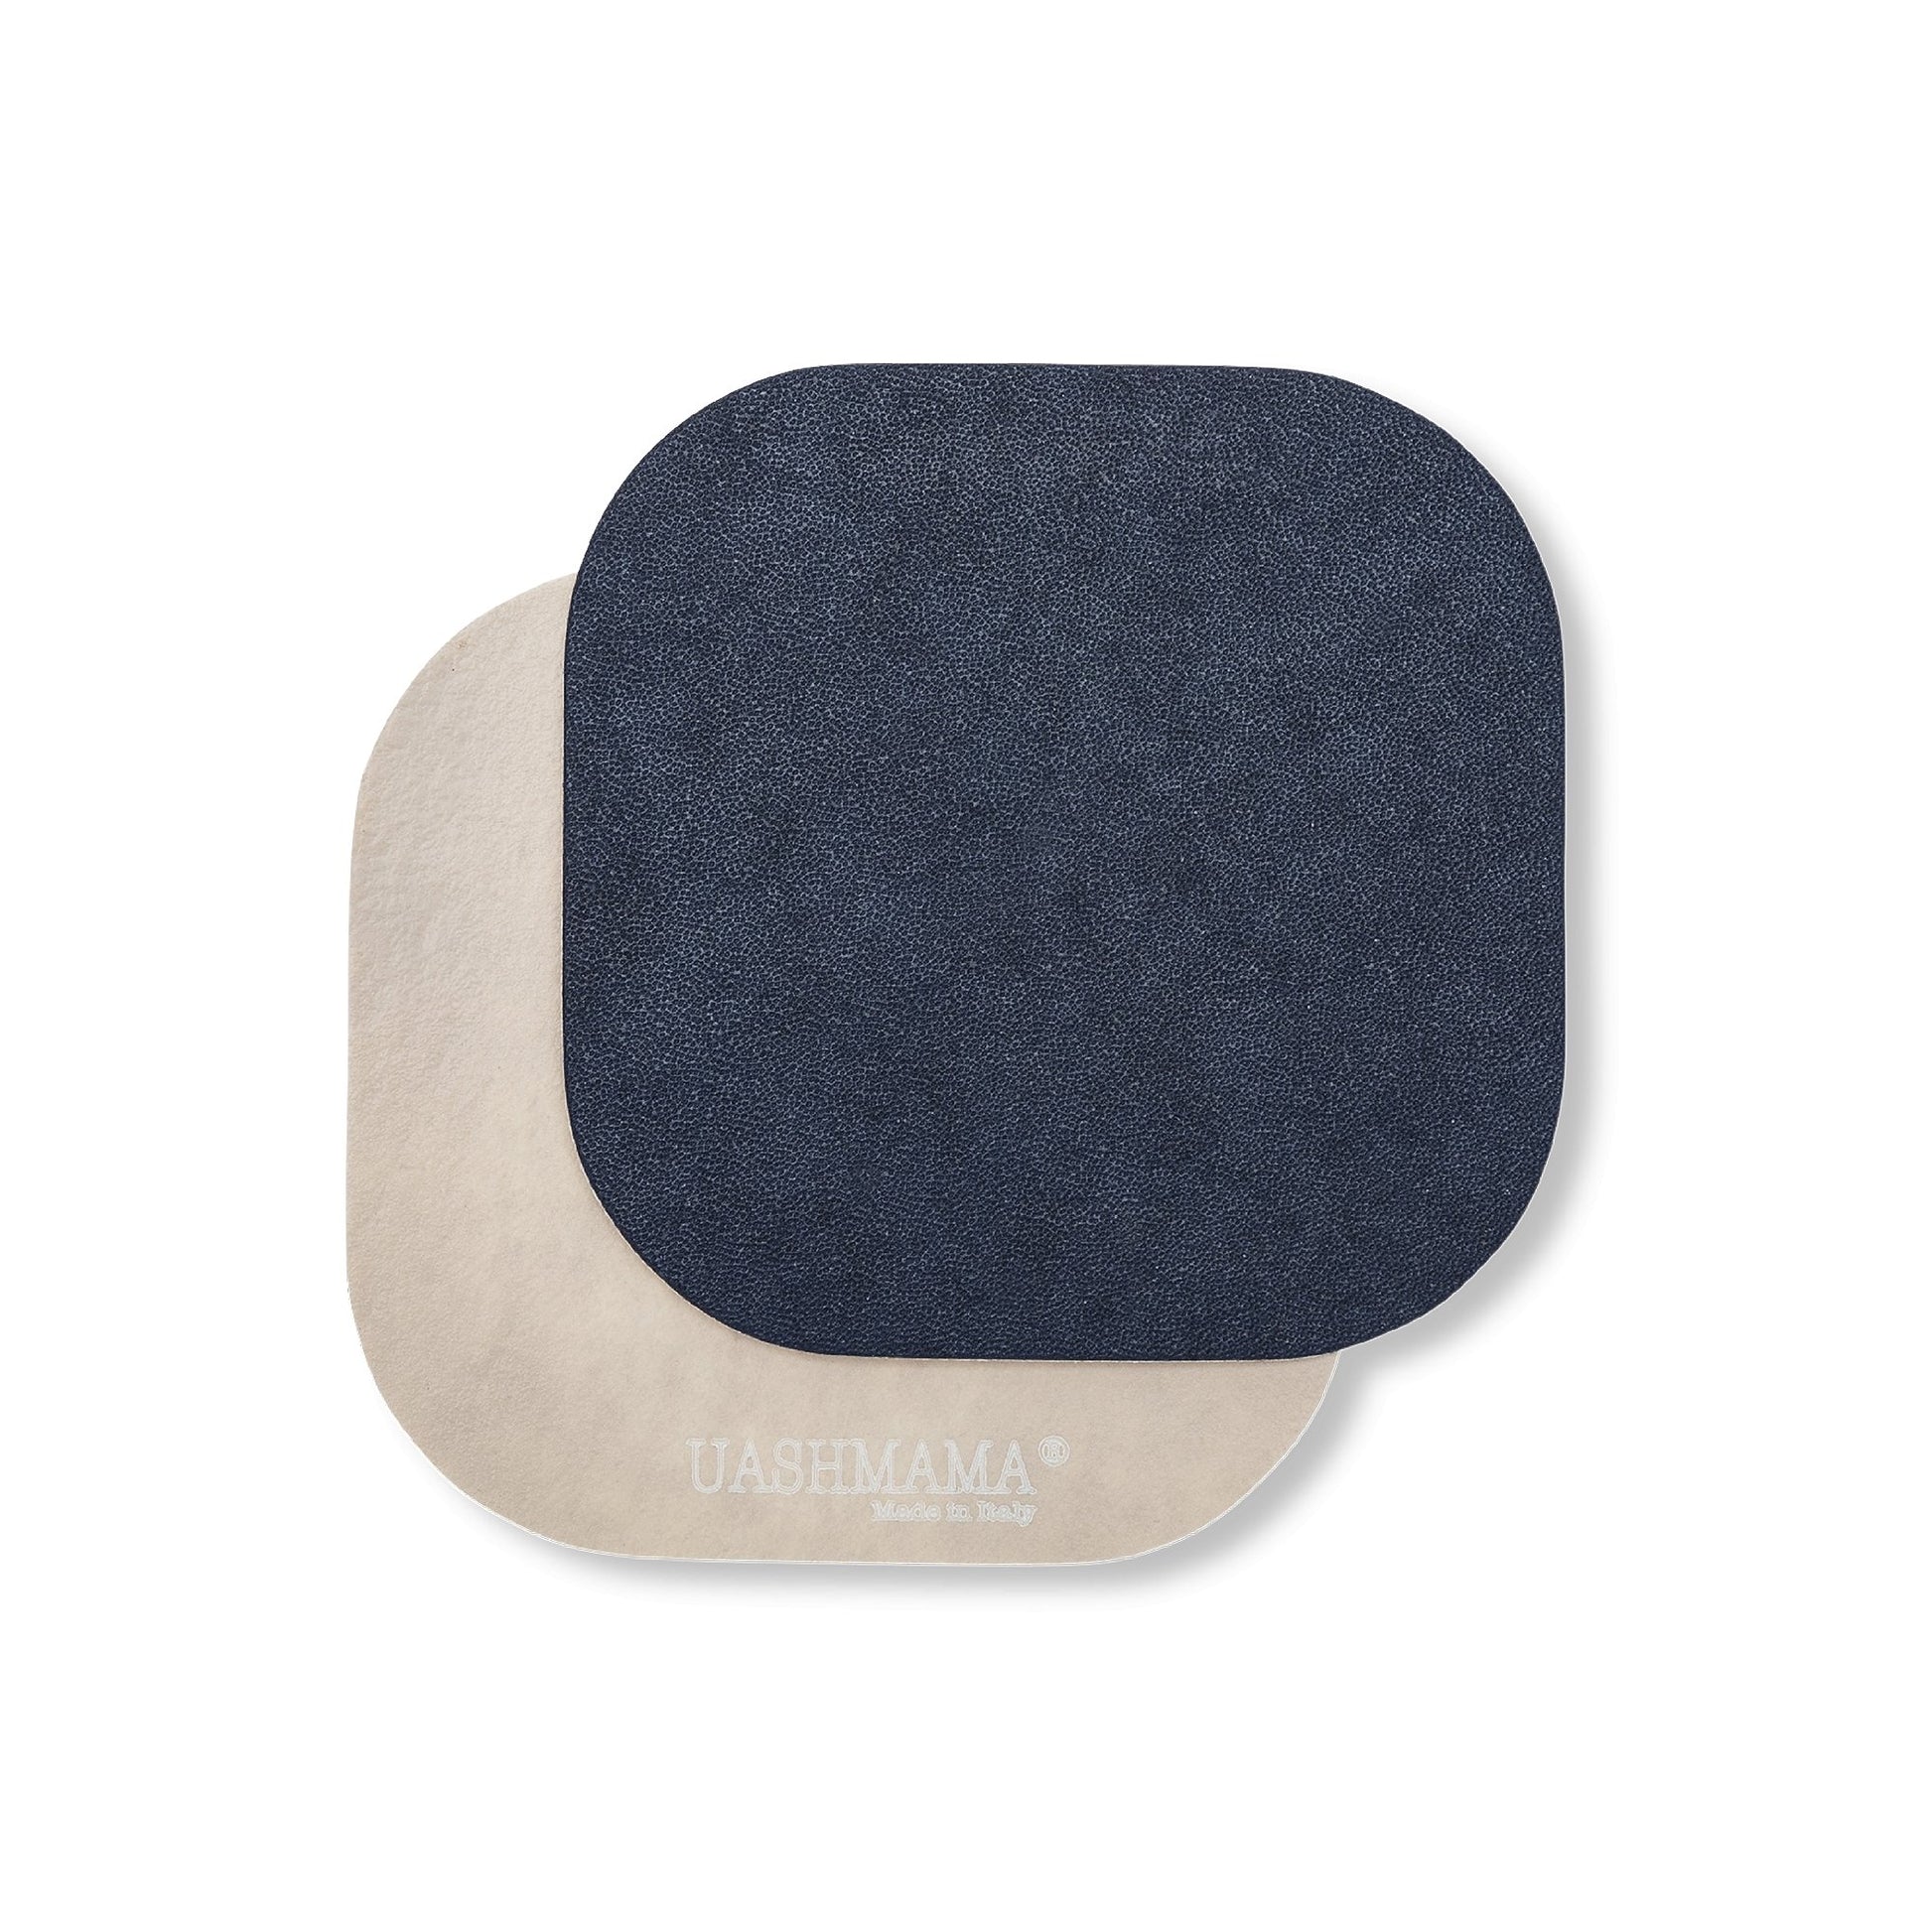 Two rounded edge square washable paper coasters lie one atop the other. The one in the foreground is navy and the one at rear is beige.